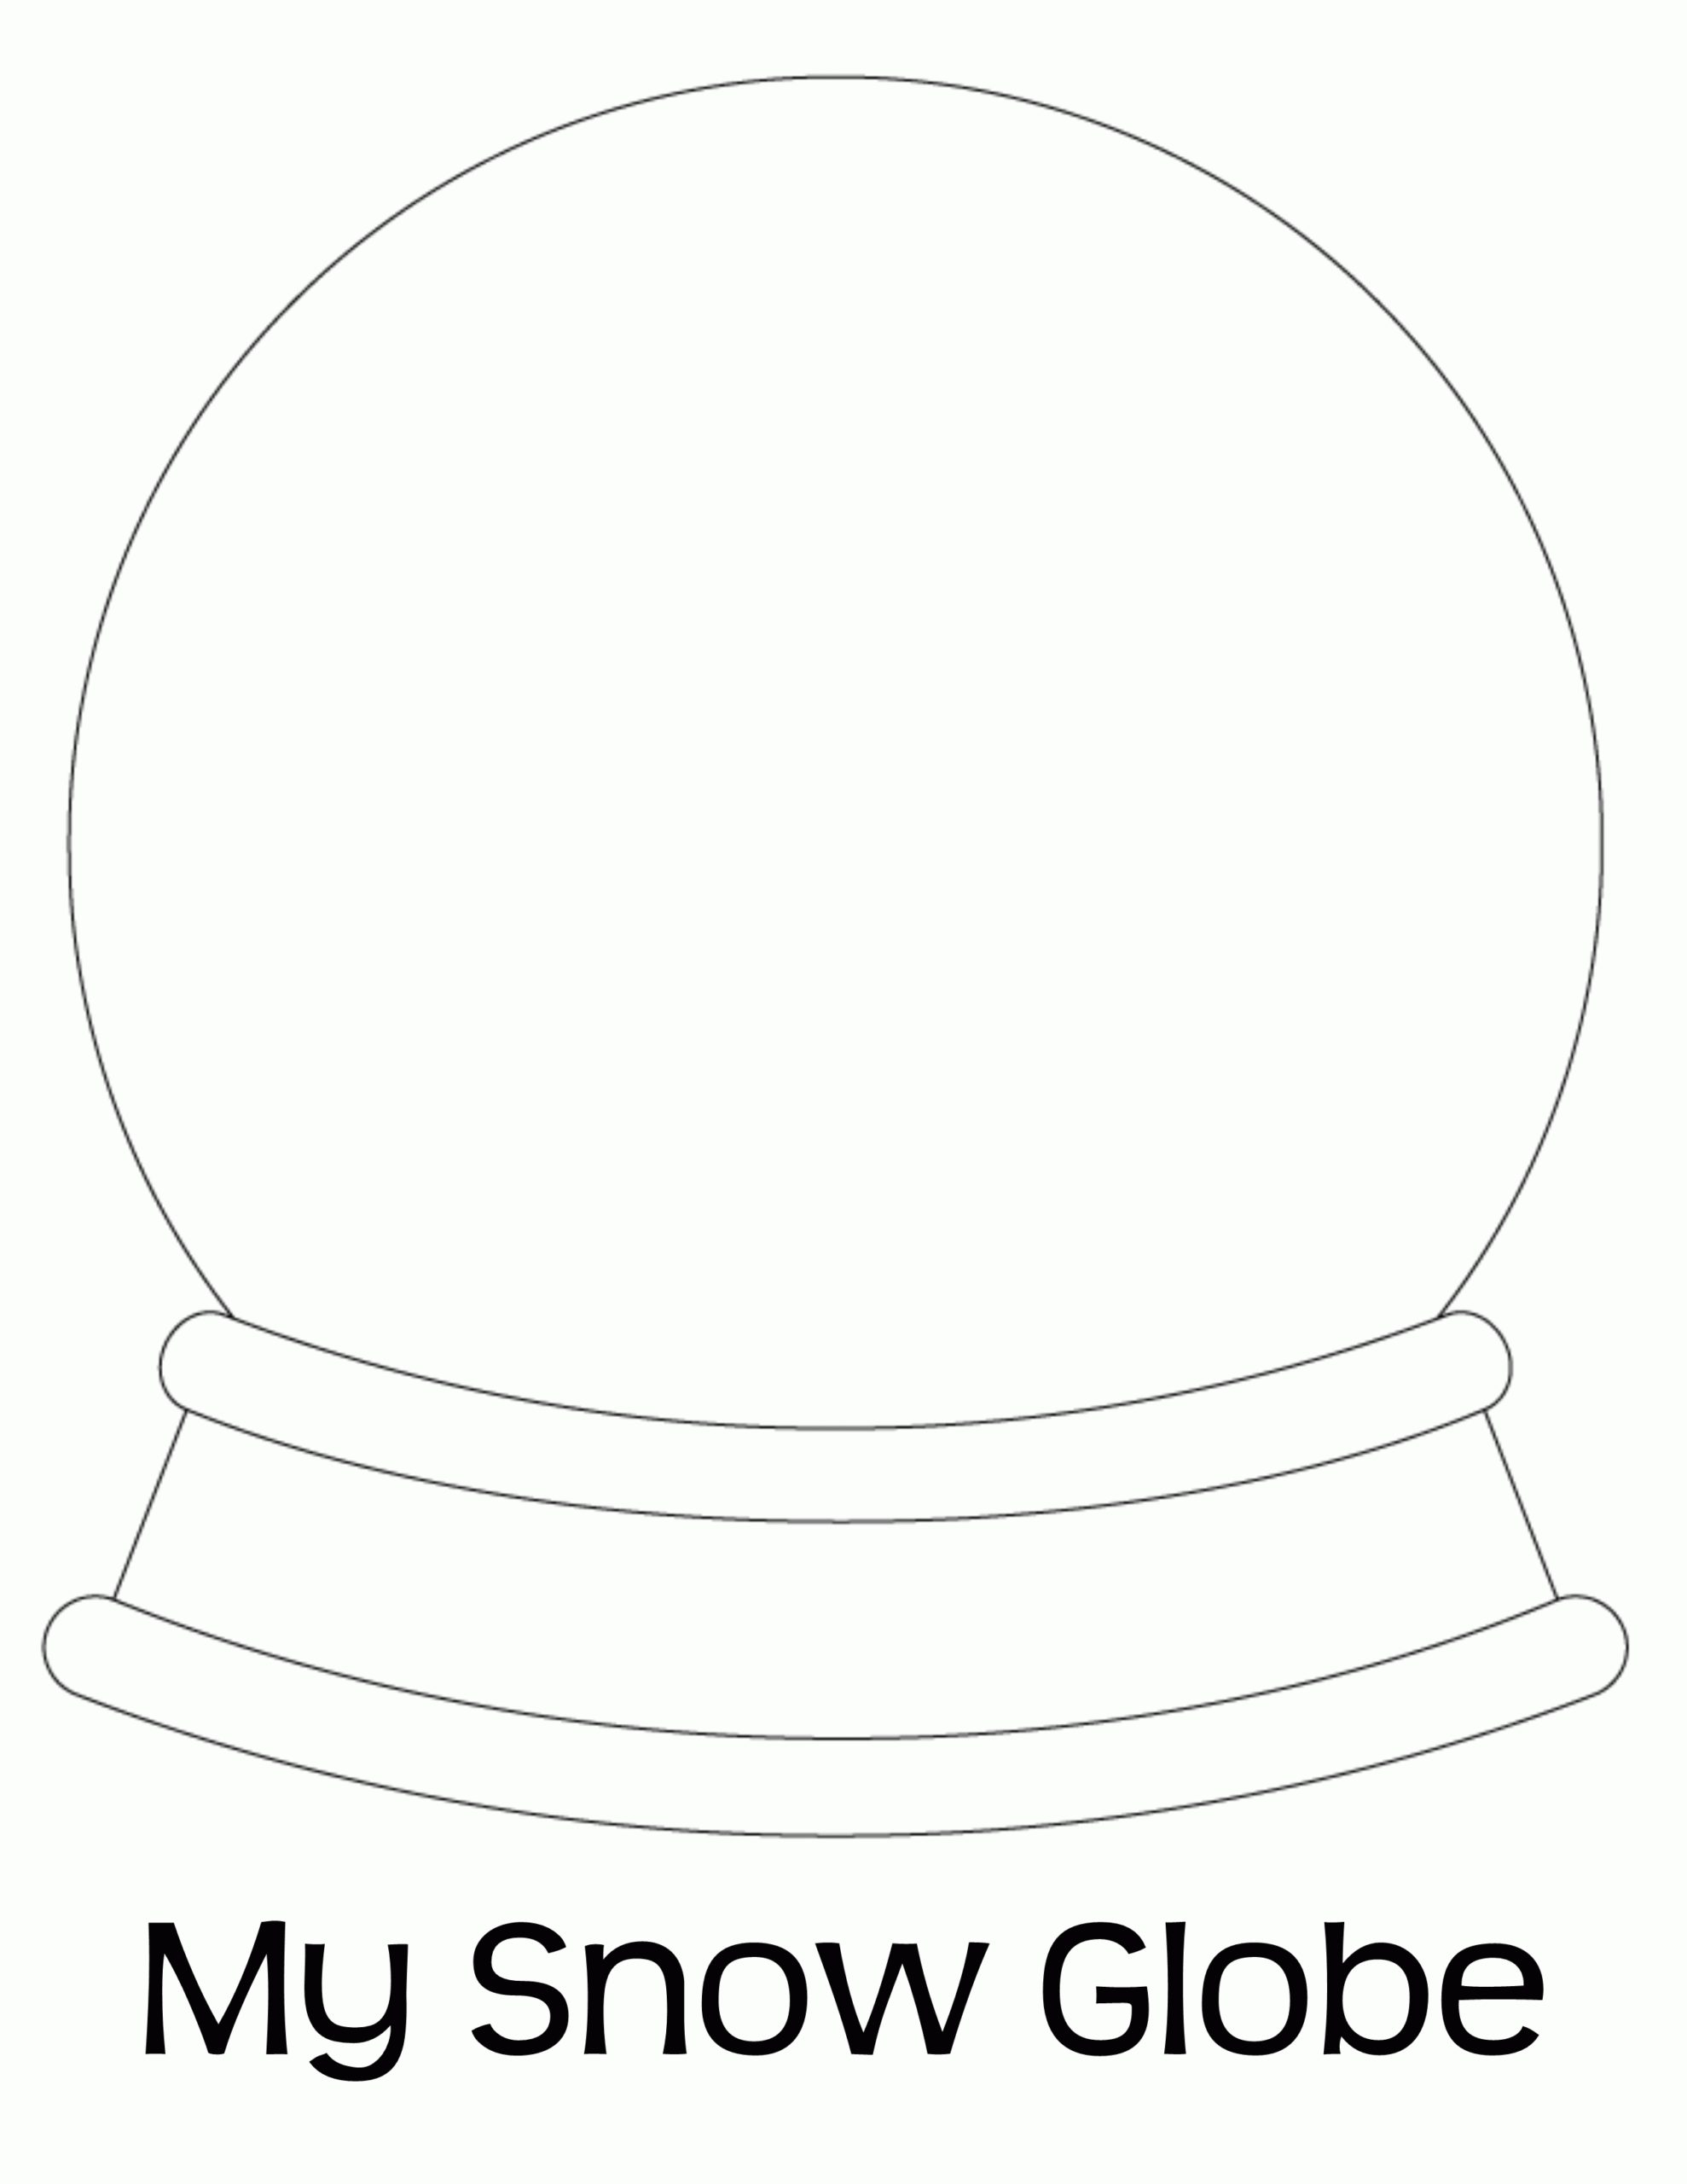 Coloring Pages Most Brilliant Blank Snow Globe Coloring Page Print Color Fun Pages Free Clip Art